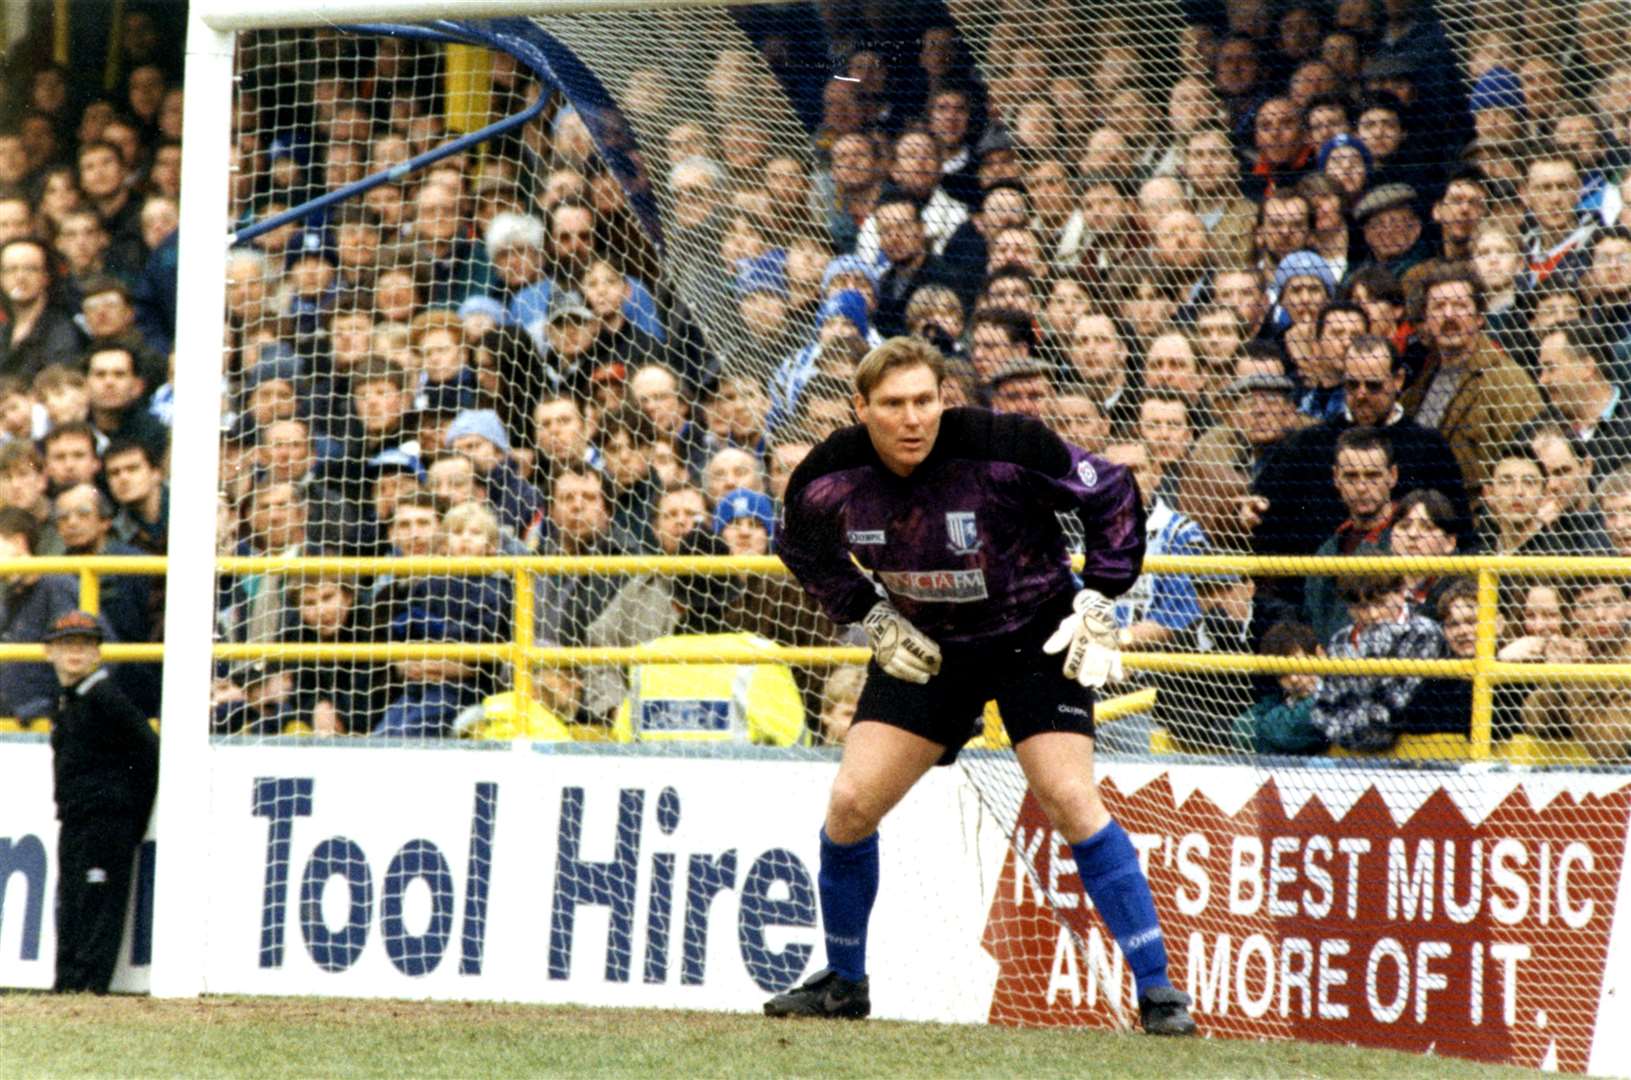 Jim Stannard in goal for Gillingham during his record-breaking 1995/96 campaign